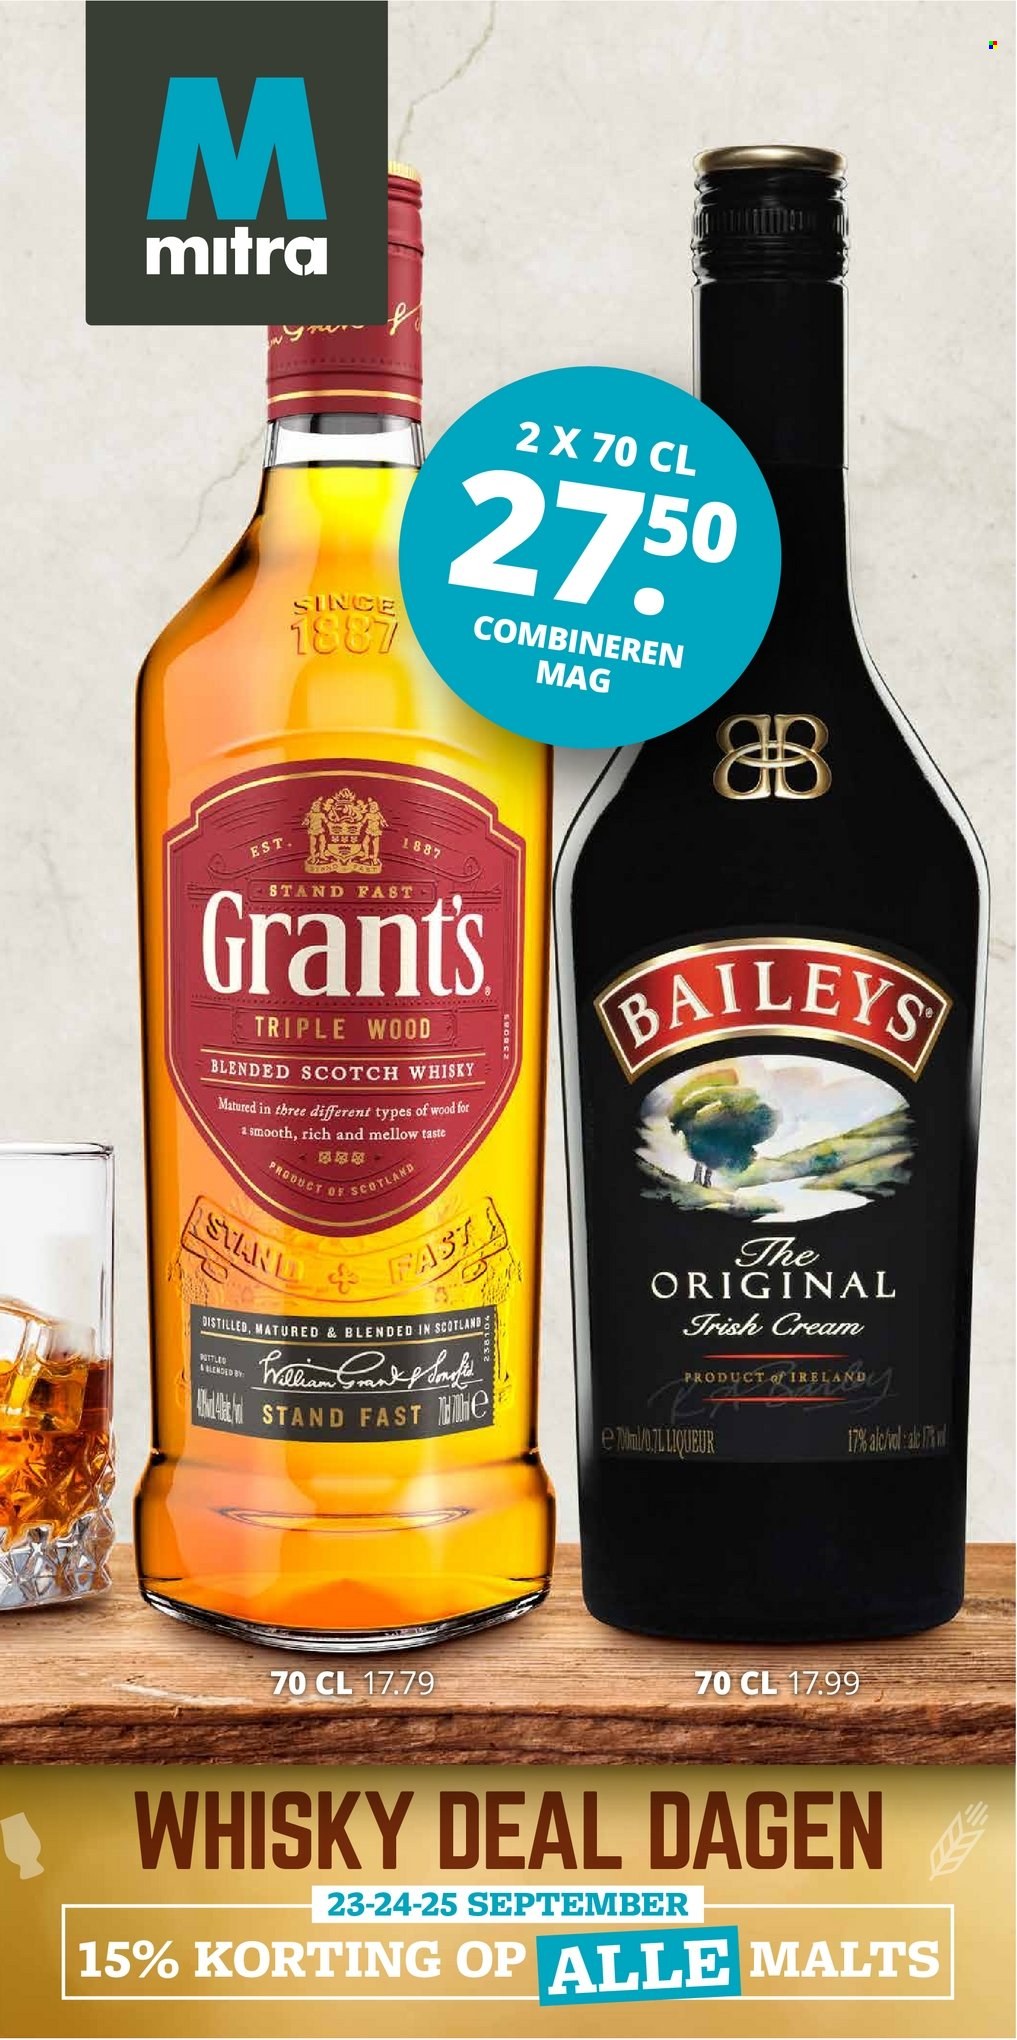 thumbnail - Mitra-aanbieding - 20-9-2021 - 3-10-2021 -  producten in de aanbieding - blended scotch whisky, liqueur, scotch whisky, whisky, Grant‘s, Baileys. Pagina 1.